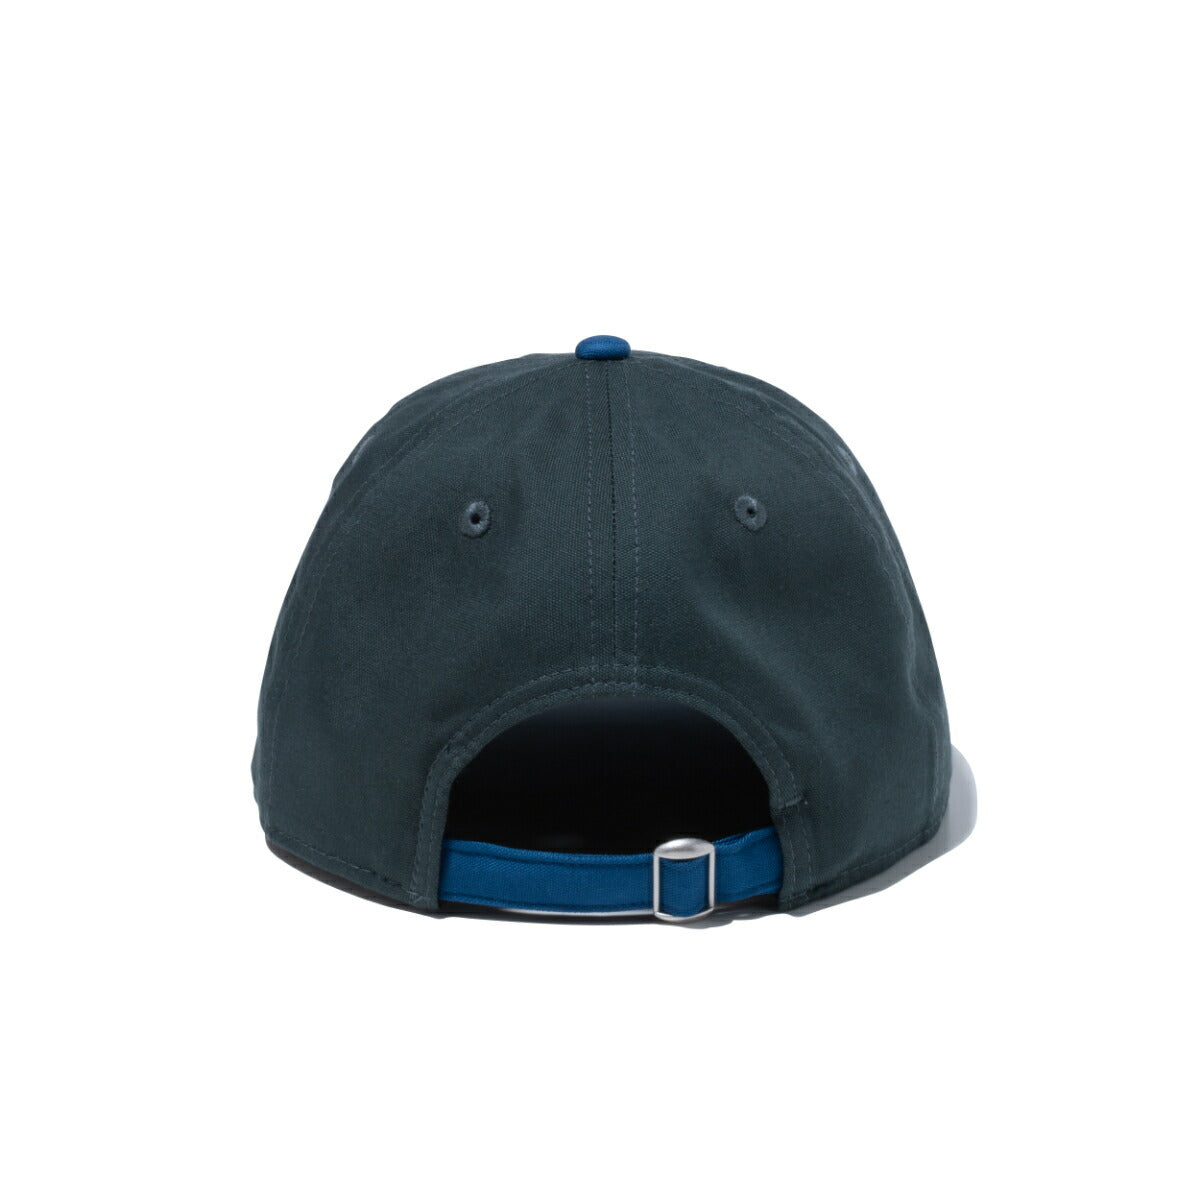 NEW YORK YANKEES TWO-TONE RETRO CROWN 9FIFTY